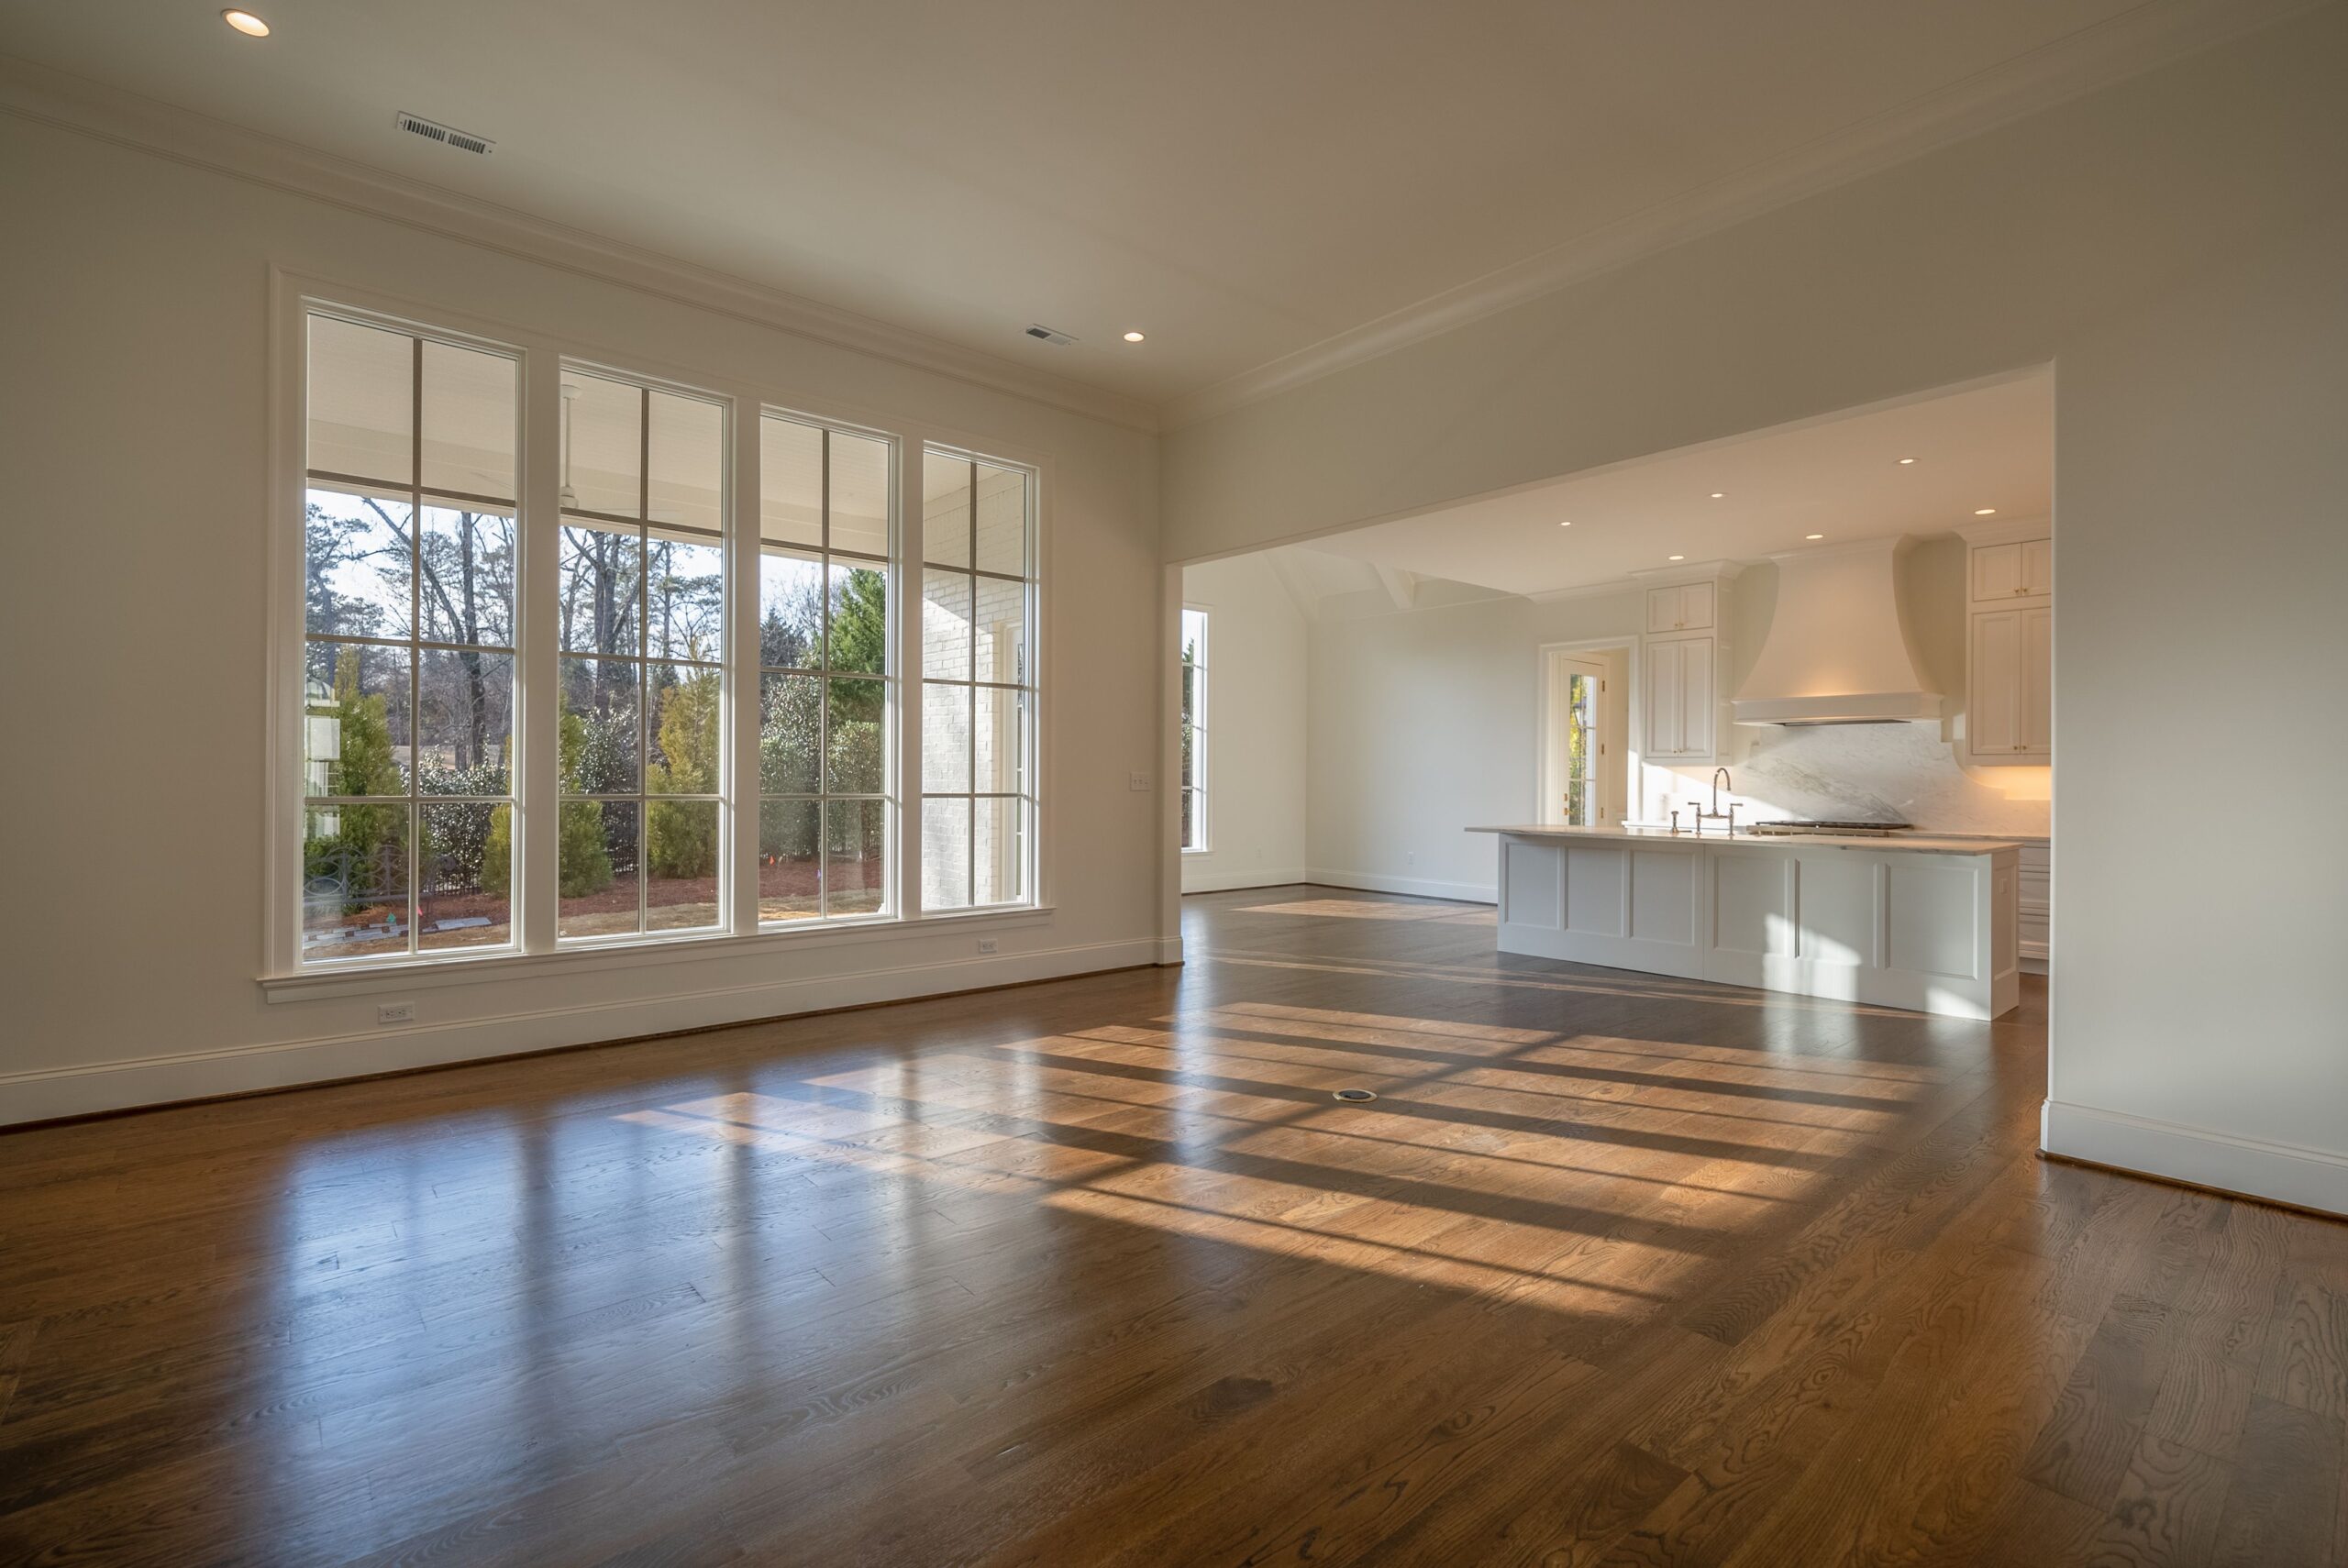 A large open floor plan with wood floors and white walls.